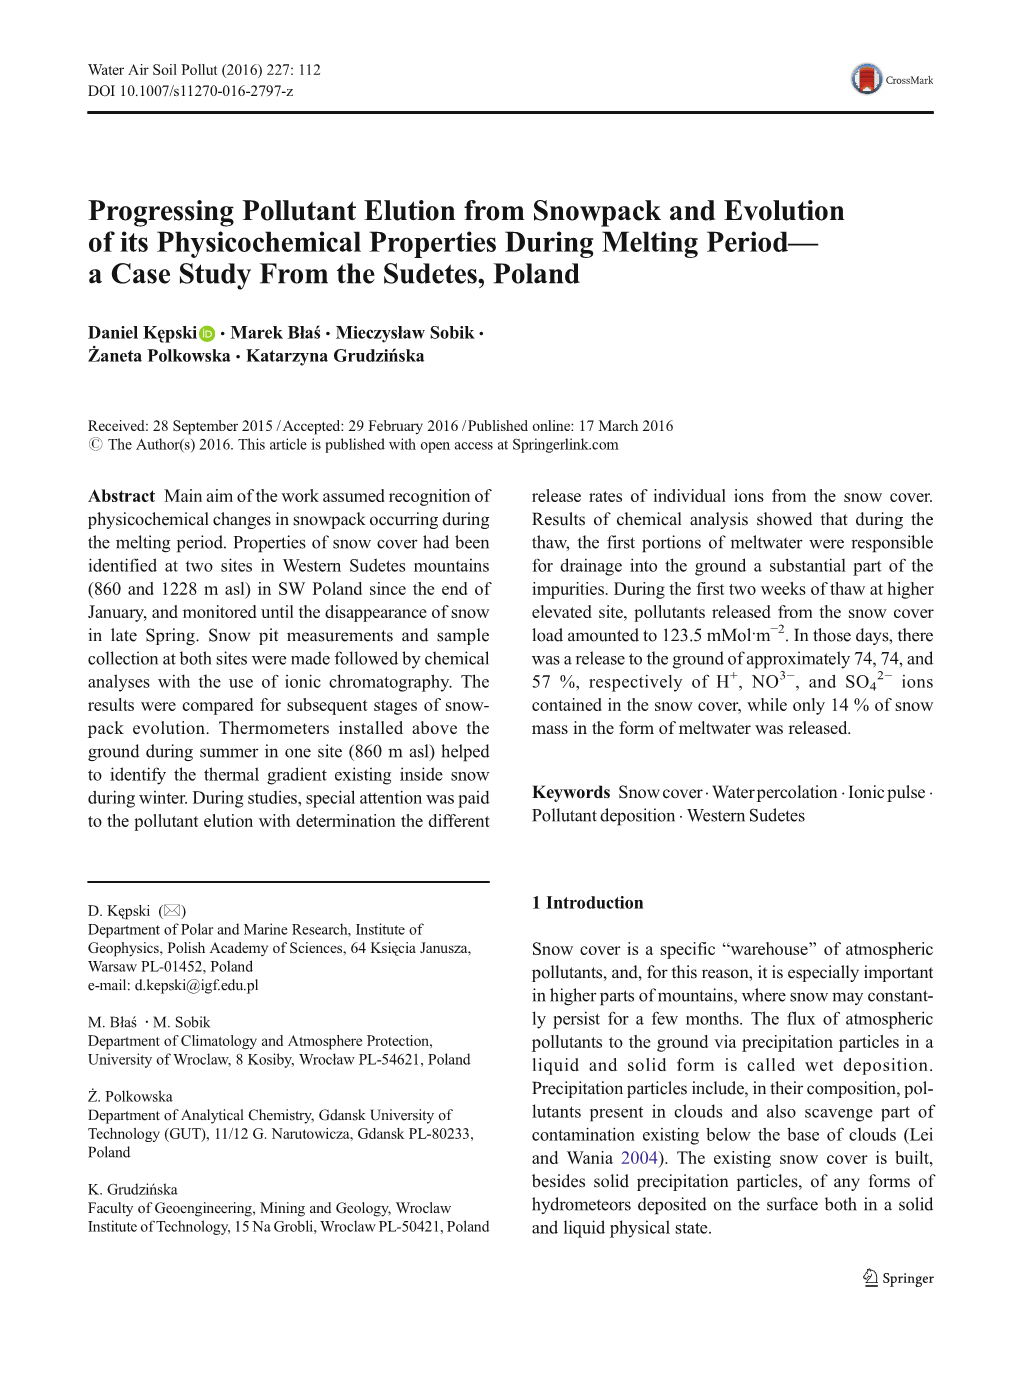 Progressing Pollutant Elution from Snowpack and Evolution of Its Physicochemical Properties During Melting Period— a Case Study from the Sudetes, Poland